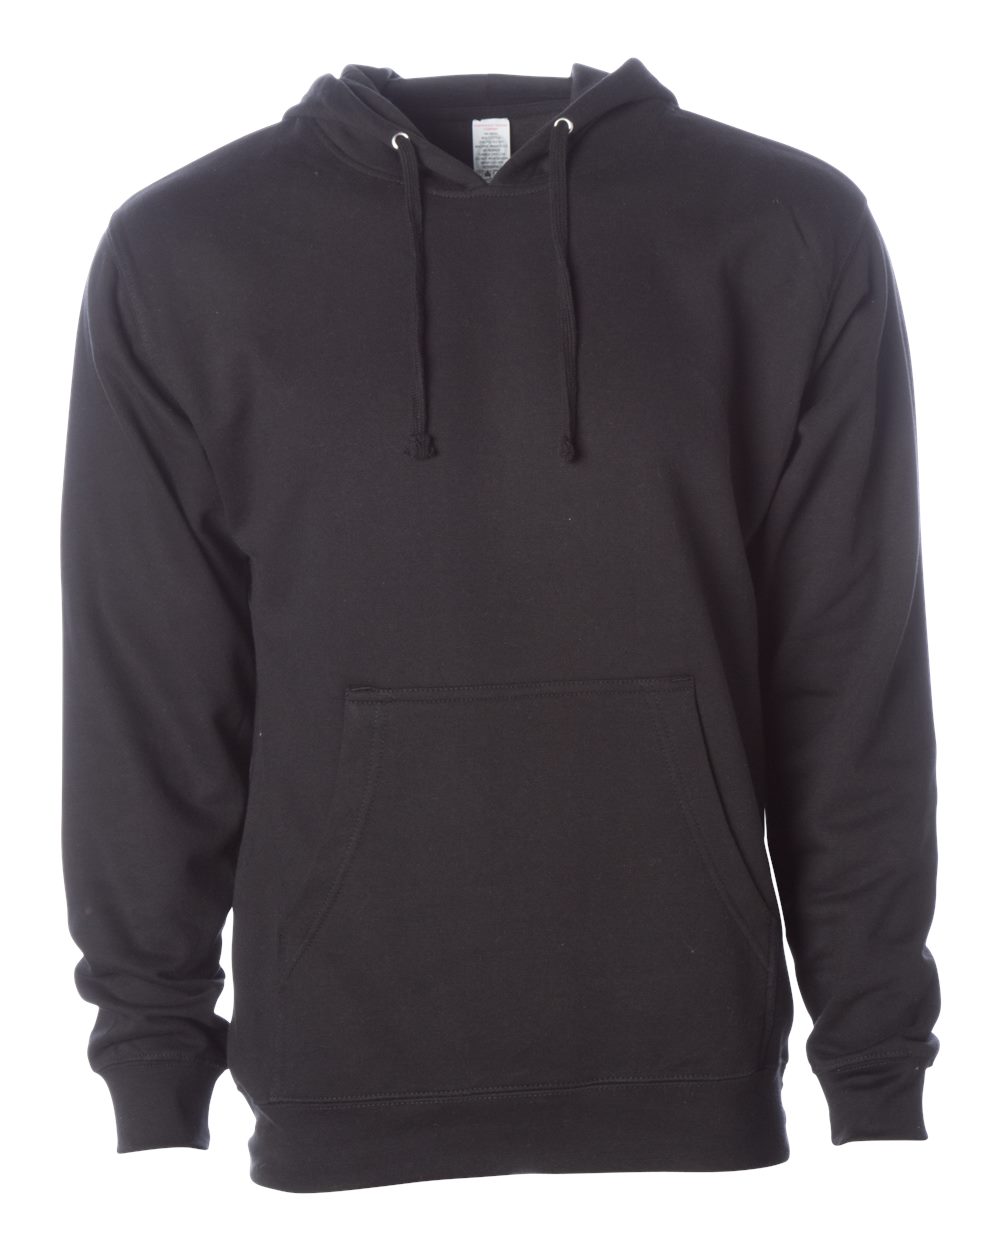 Pretreated Independent Trading Co. SS4500 Midweight Hooded Sweatshirt - Black